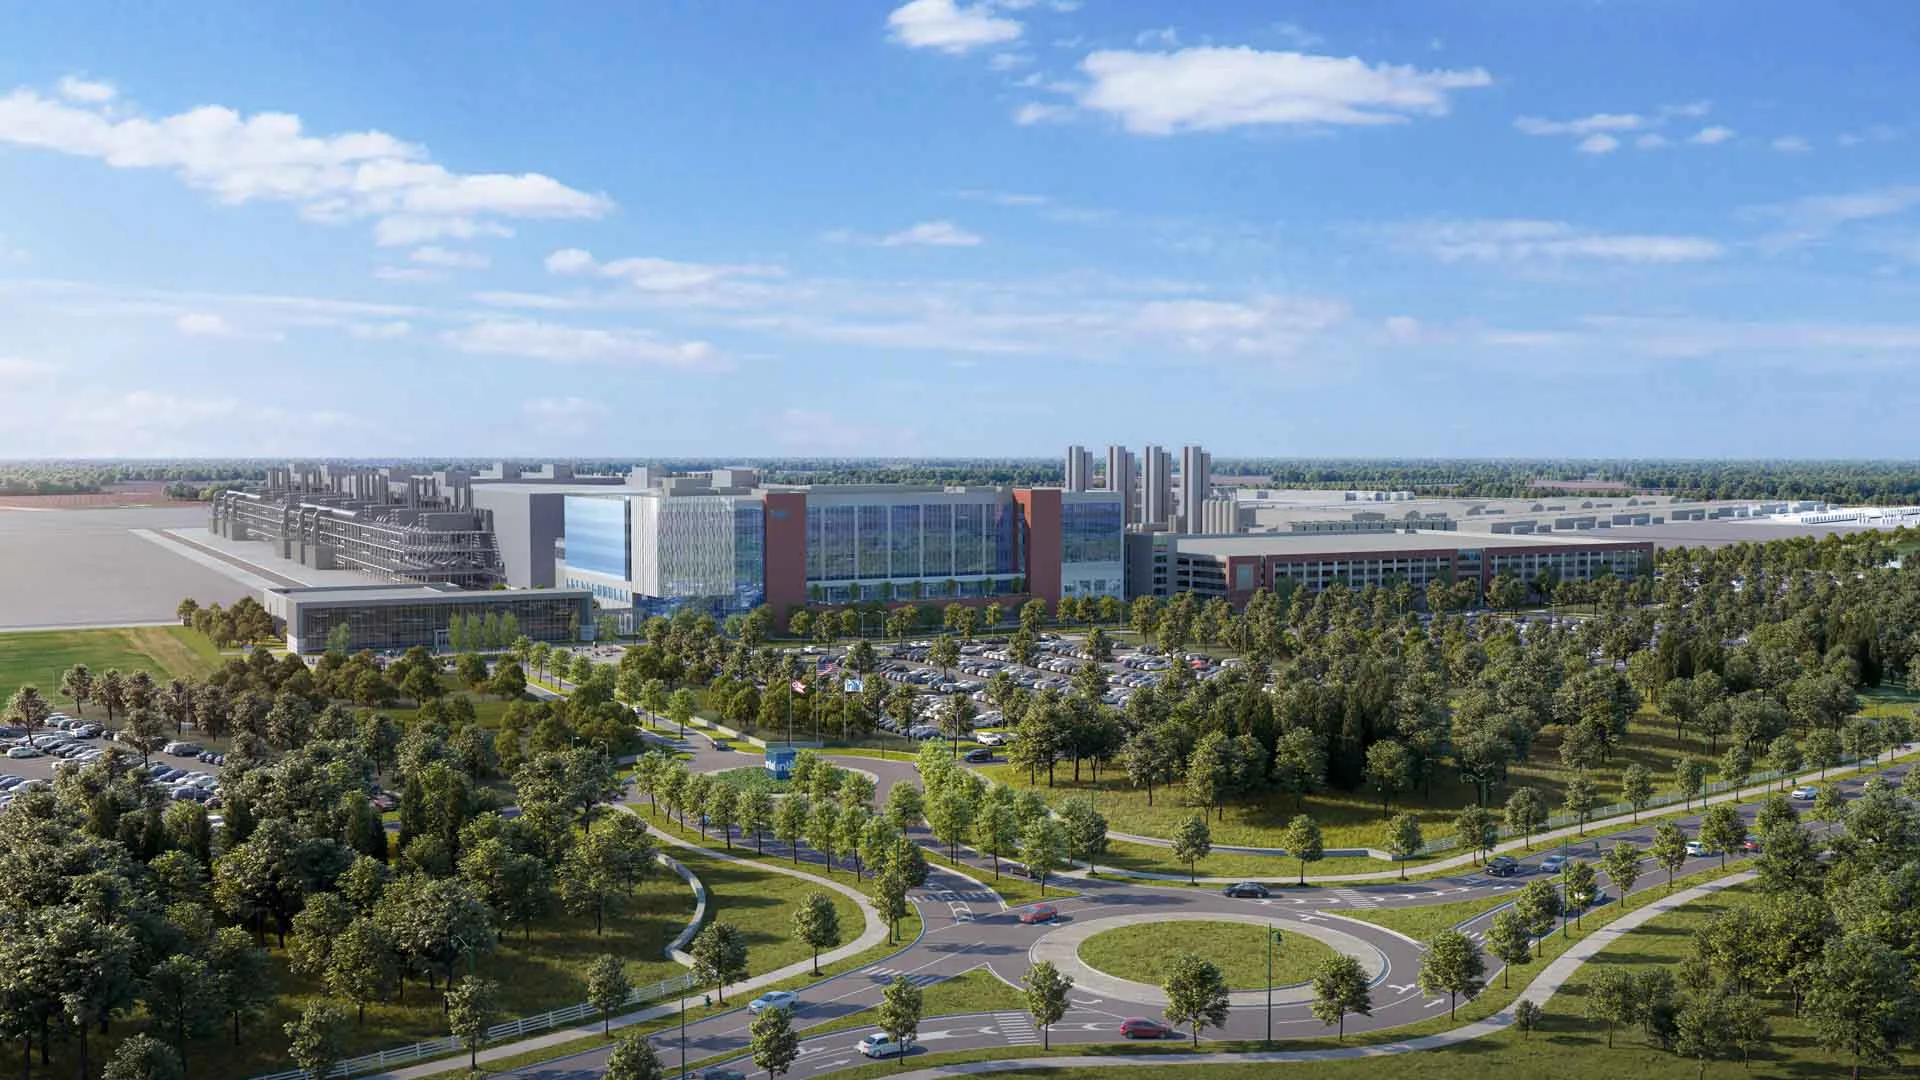 A rendering of the Intel facility front view